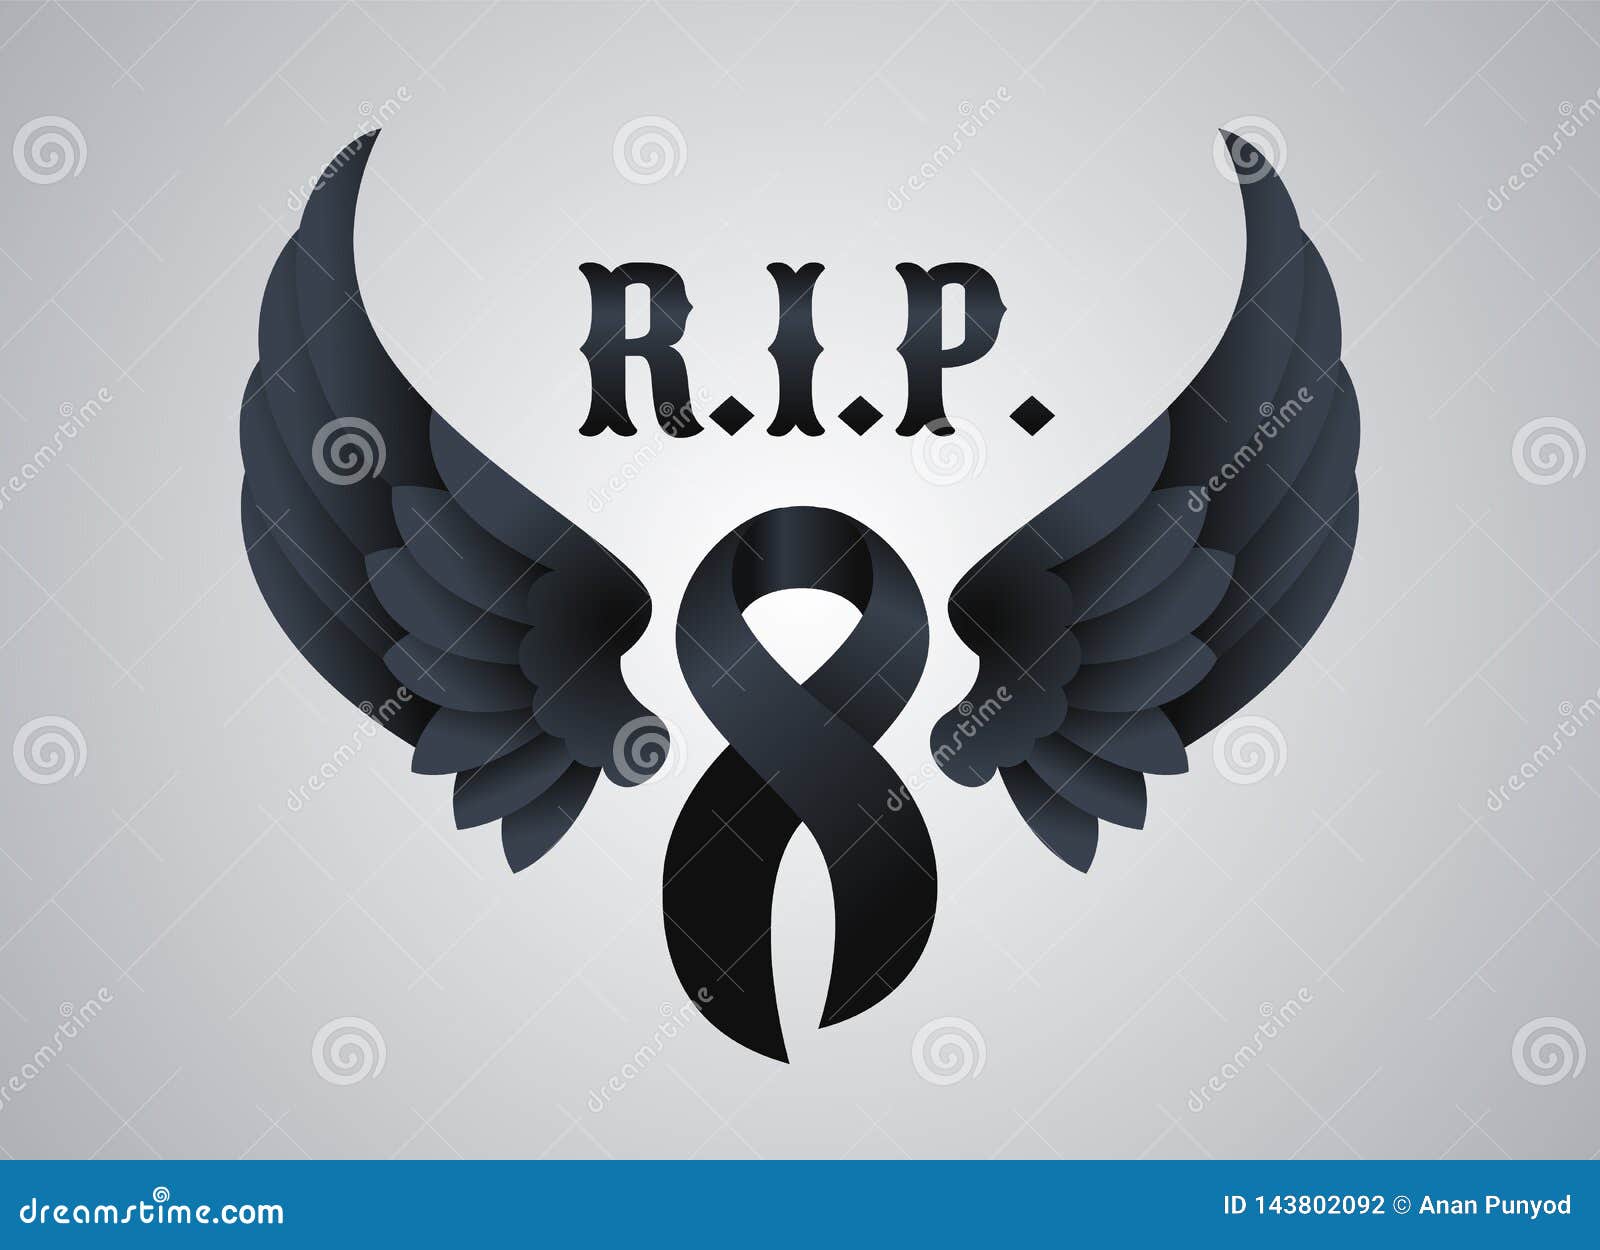 rest in peace rip. with black ribbon and peace wings  desig